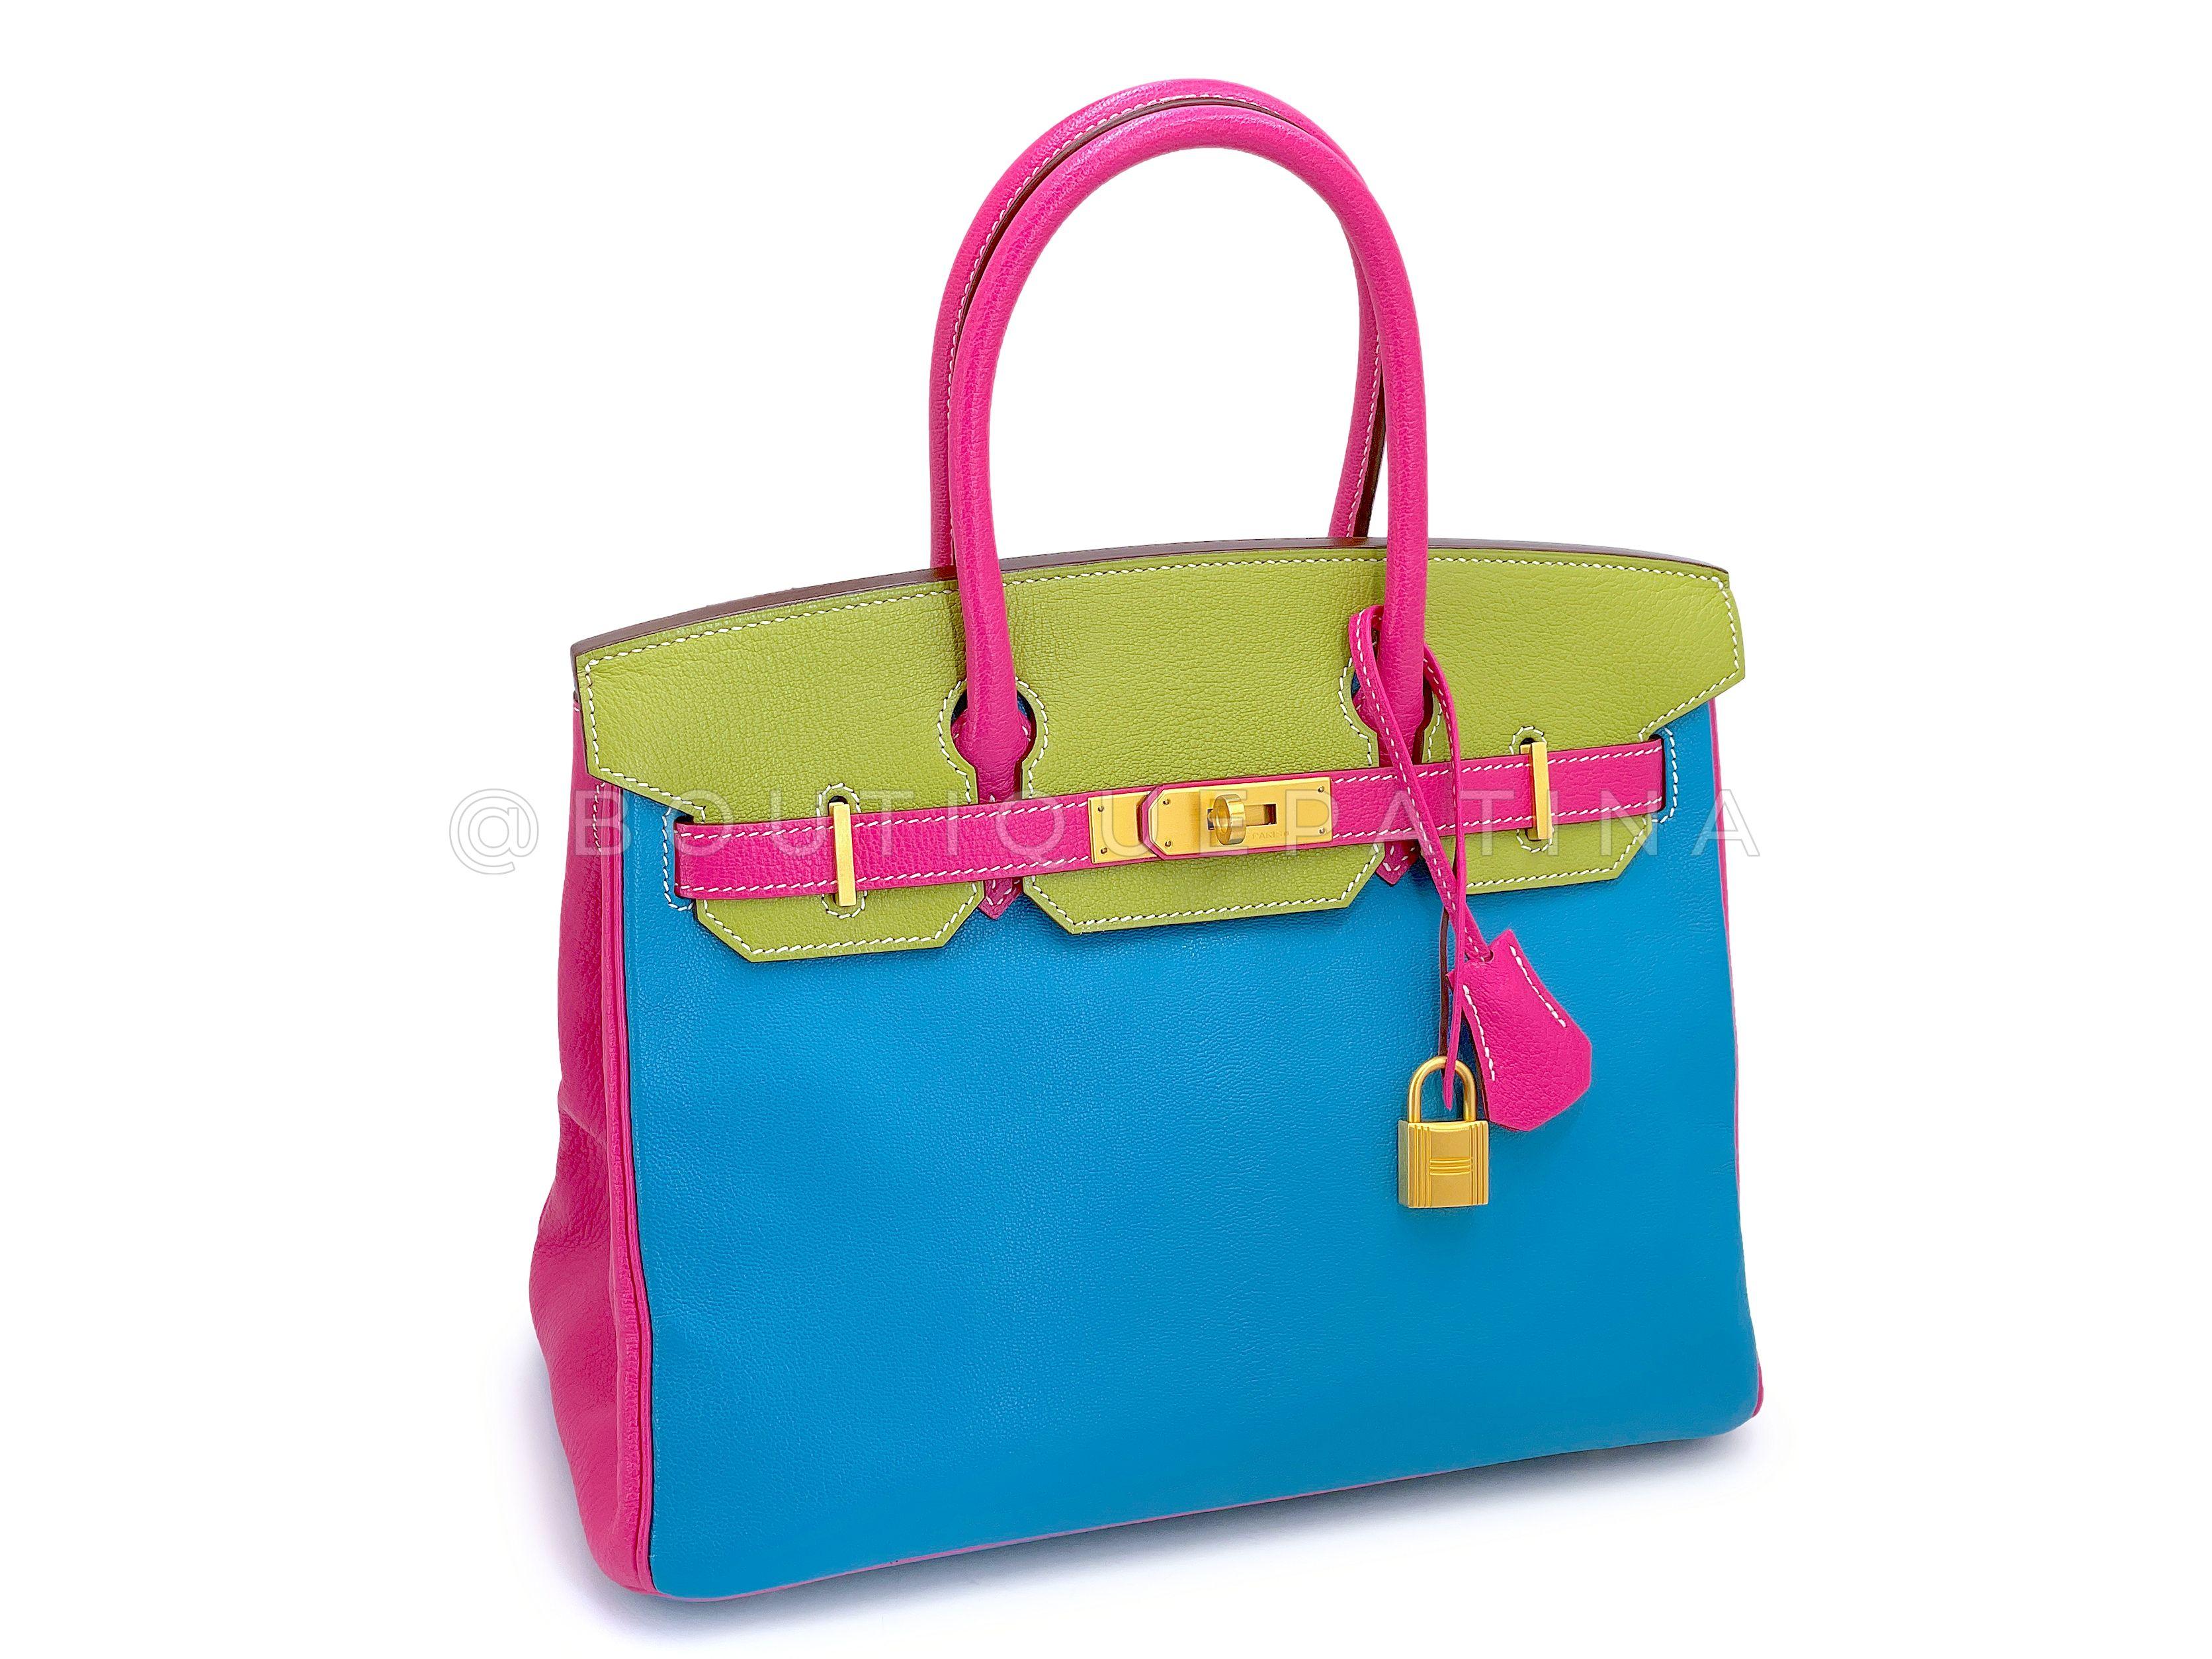 Store item: 68121
The Hermès Birkin is probably one of the most coveted and desired bags in the world. Hand crafted and hand stitched, these bags are extremely hard to find. 

Special order horseshoe stamped birkin in three coveted complementary